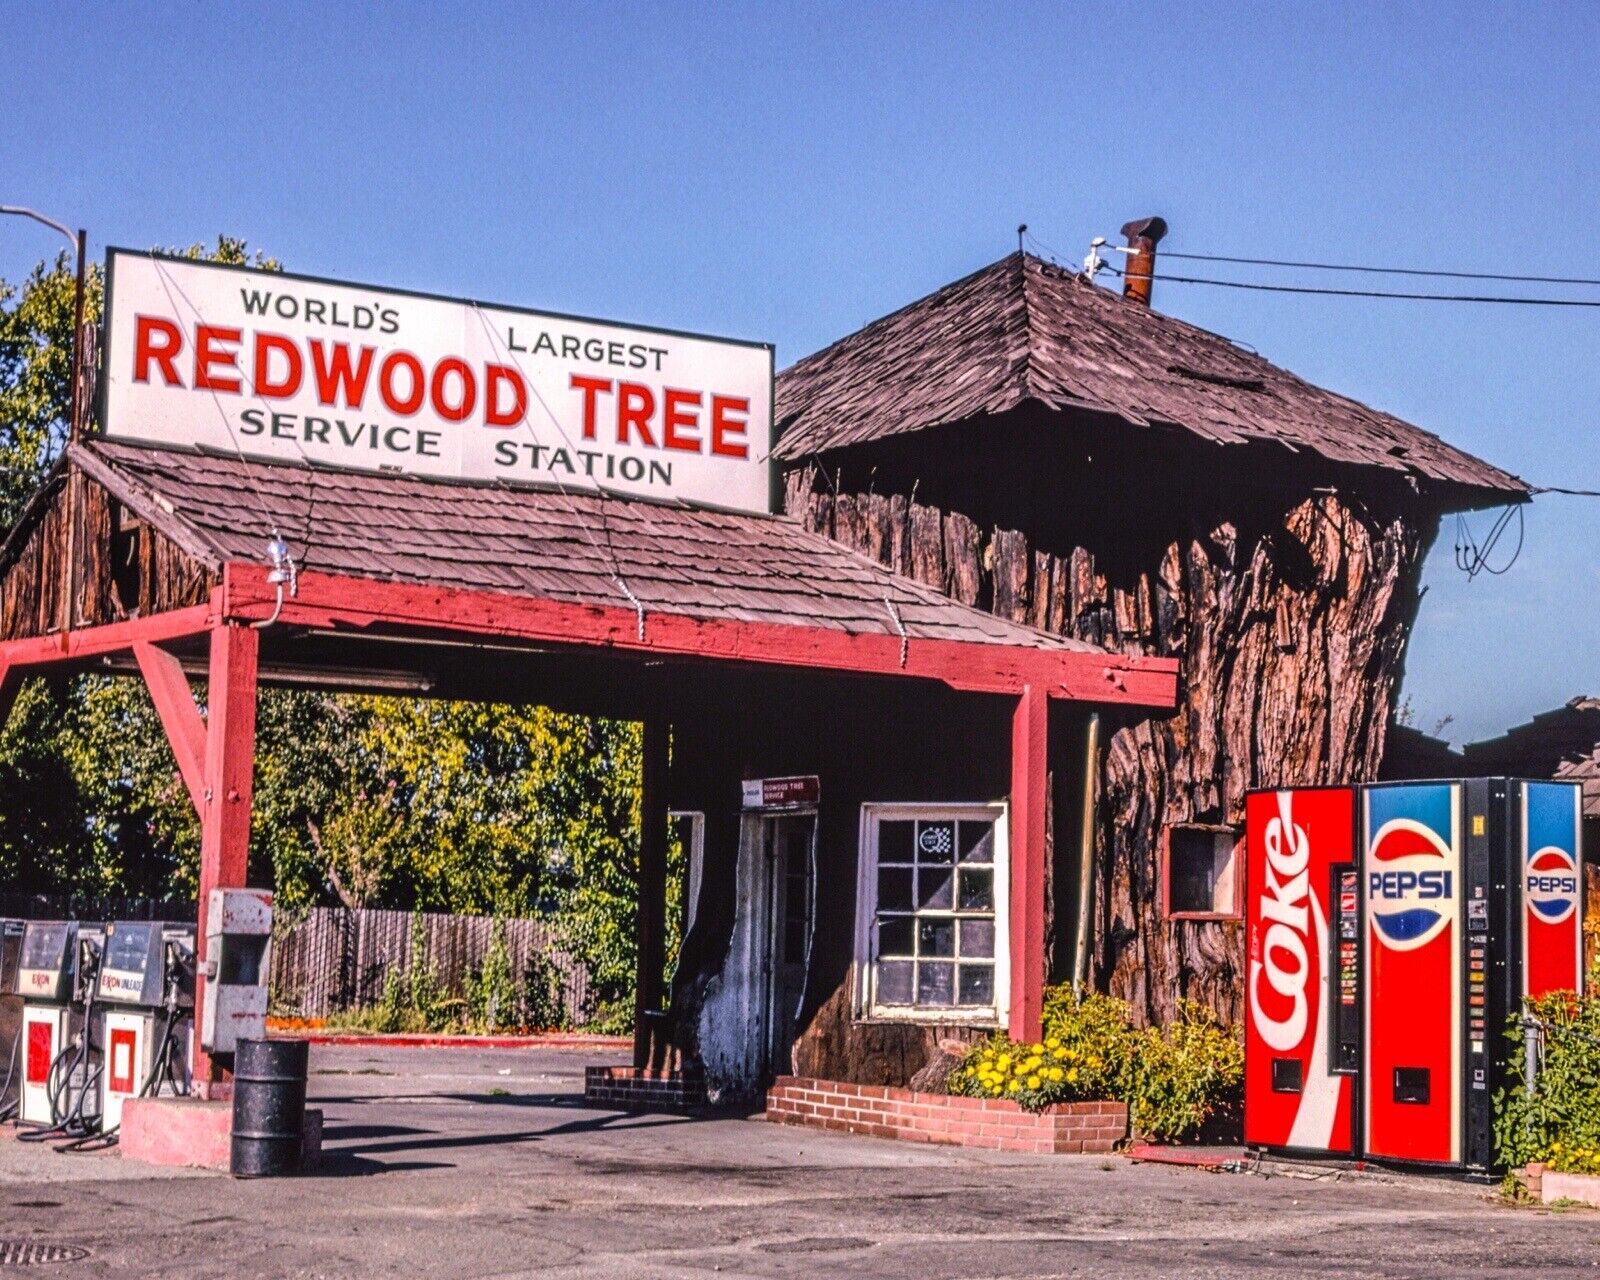 8x10 Glossy Color Art Print 1991 World\'s Largest Redwood Tree Service Station